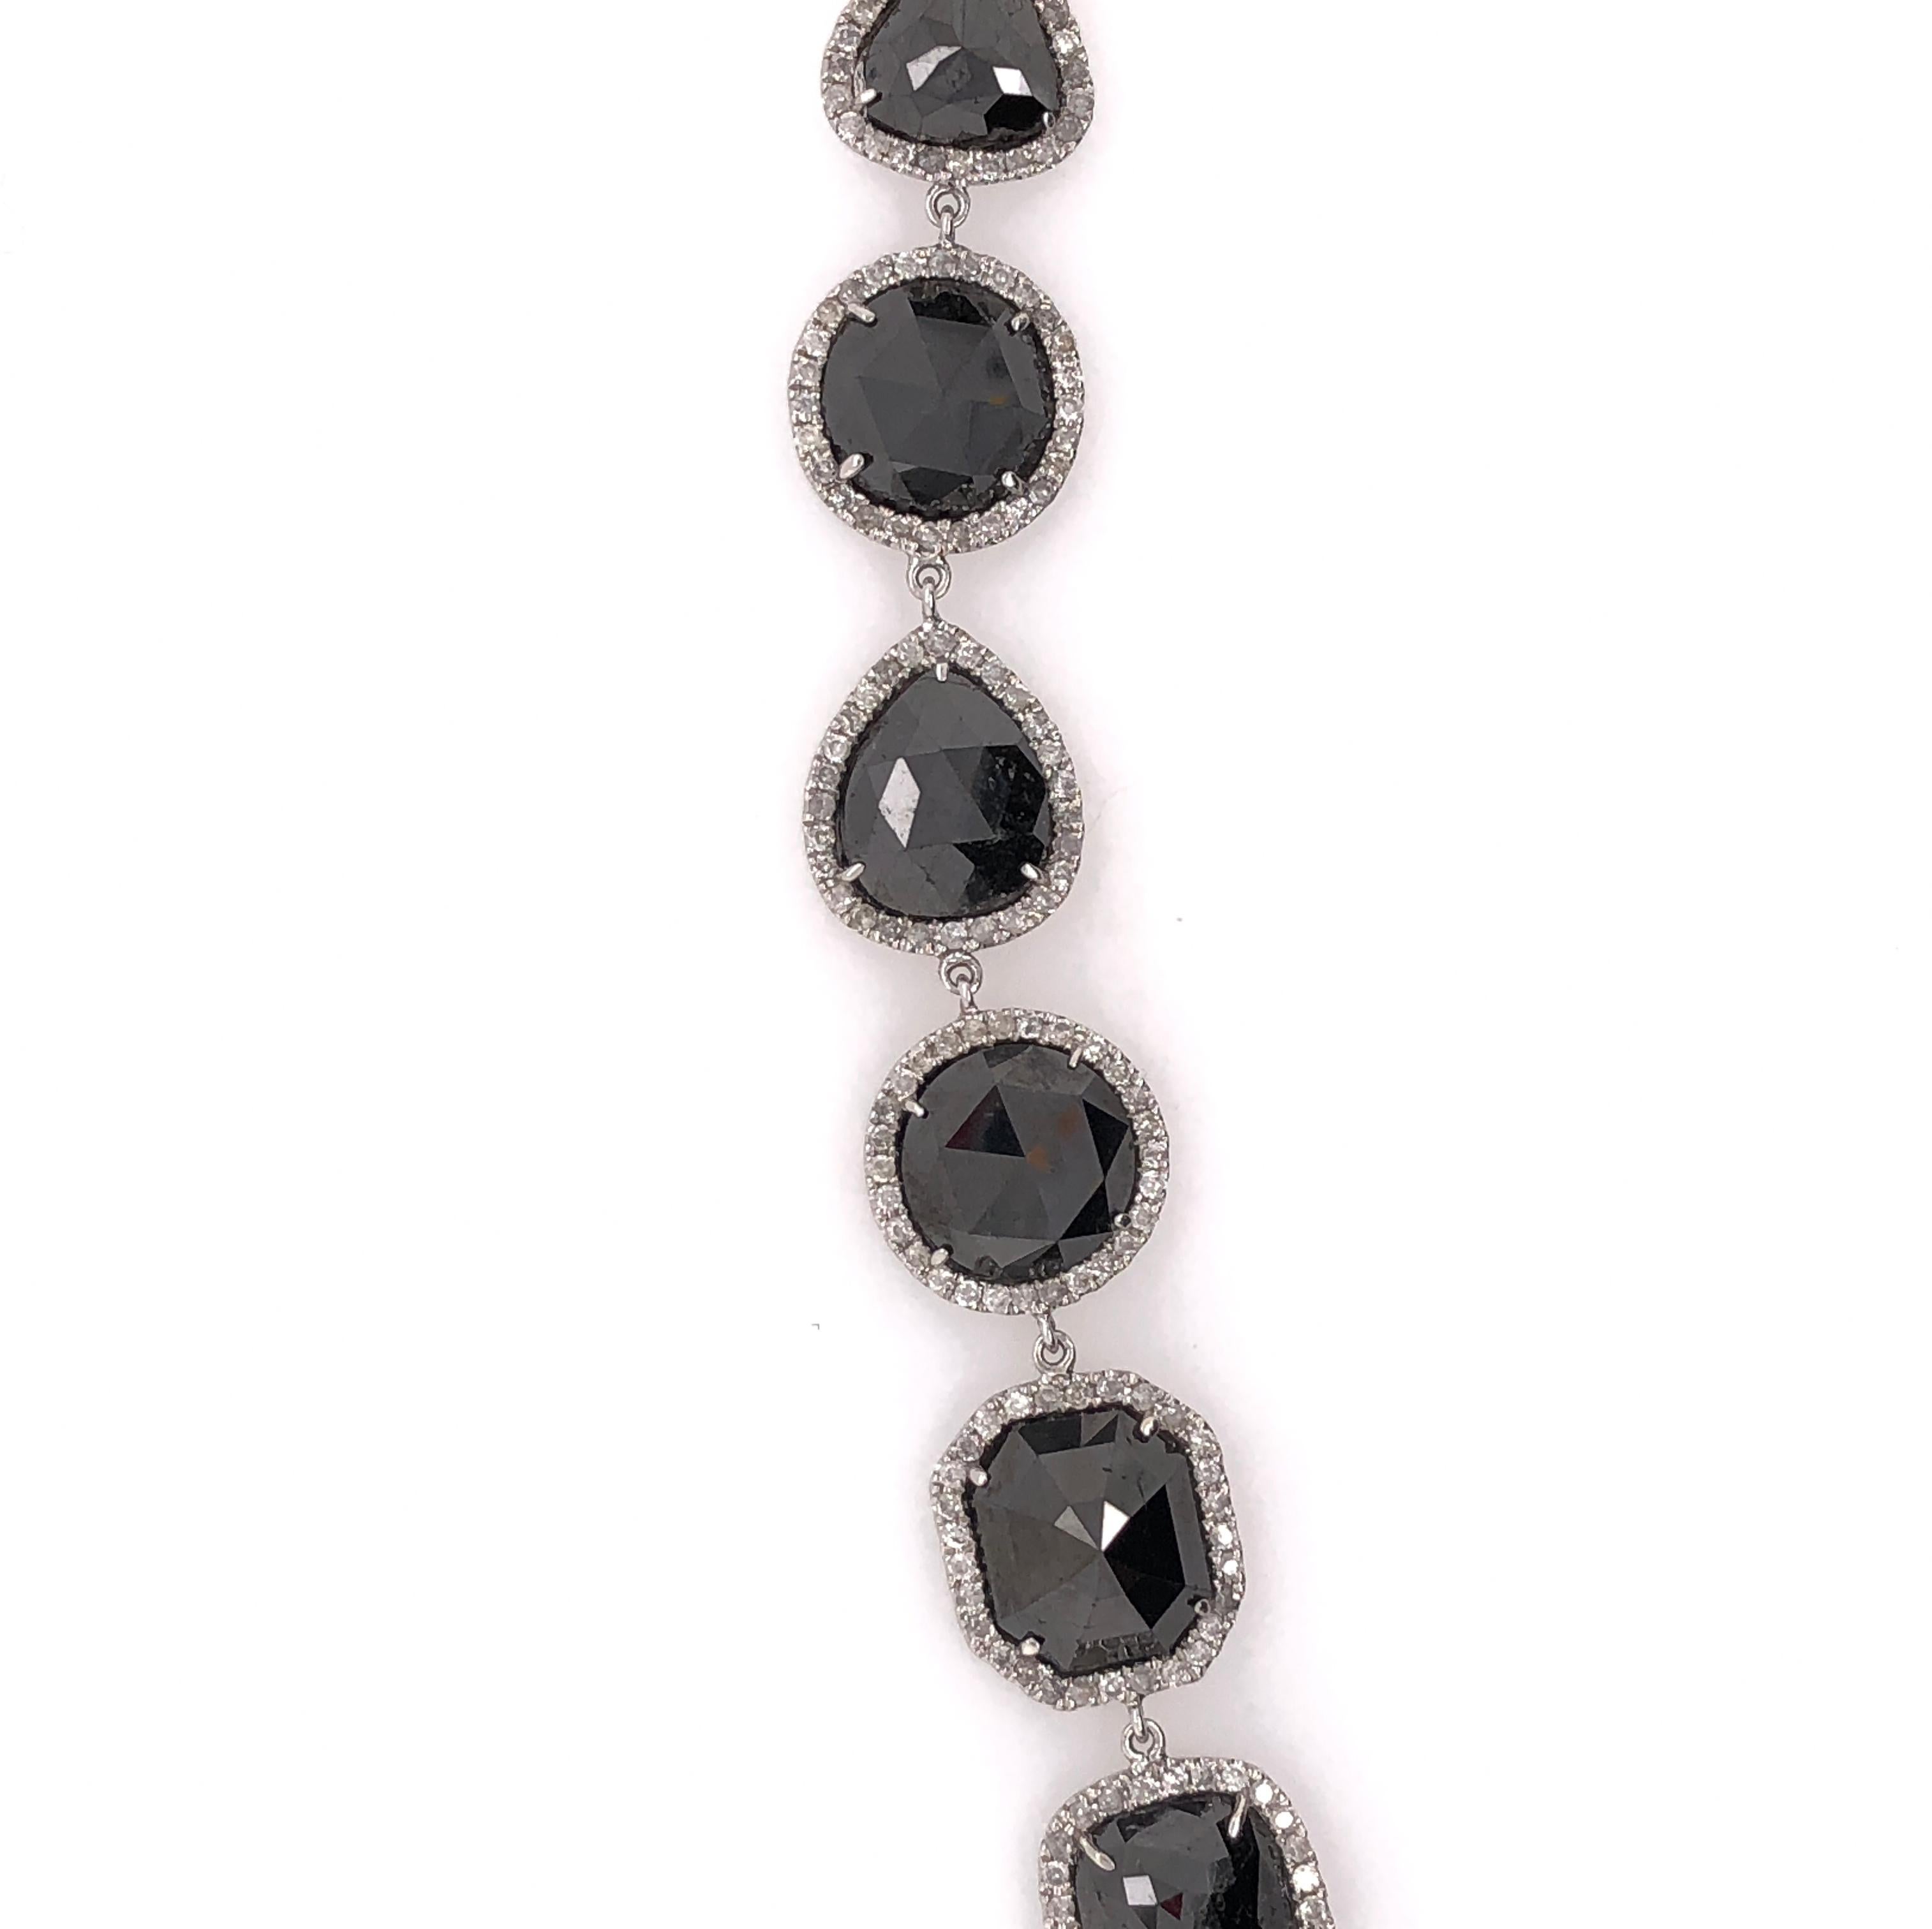 18K White Gold
Black Diamond: 35.76ct total weight.
Diamonds: 2.10ct total weight.
All diamonds are G-H/SI stones.
Length - is approximately 19.4cm/7.64inches.
Width - is approximately 1.1cm/0.44inches.